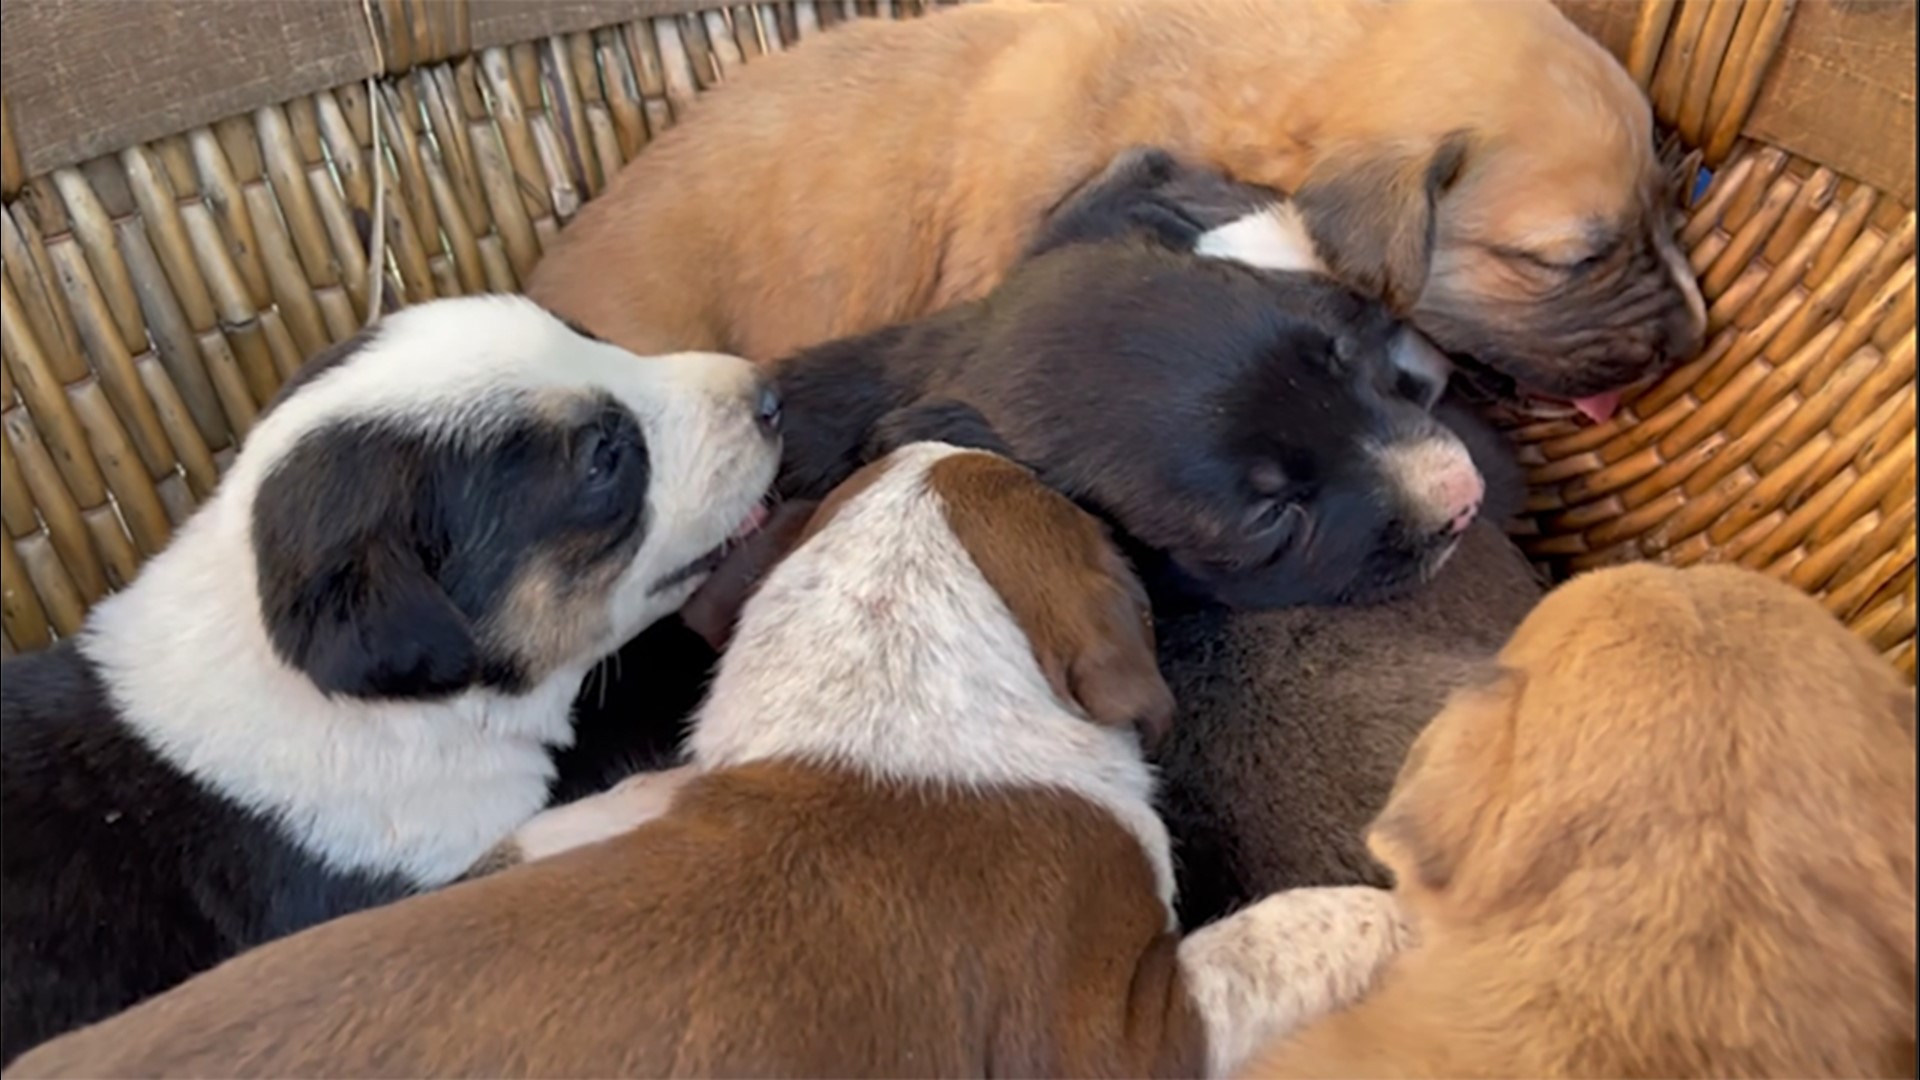 With the help of several people, nine puppies were rescued from a drainage pipe and they're now up for adoption.